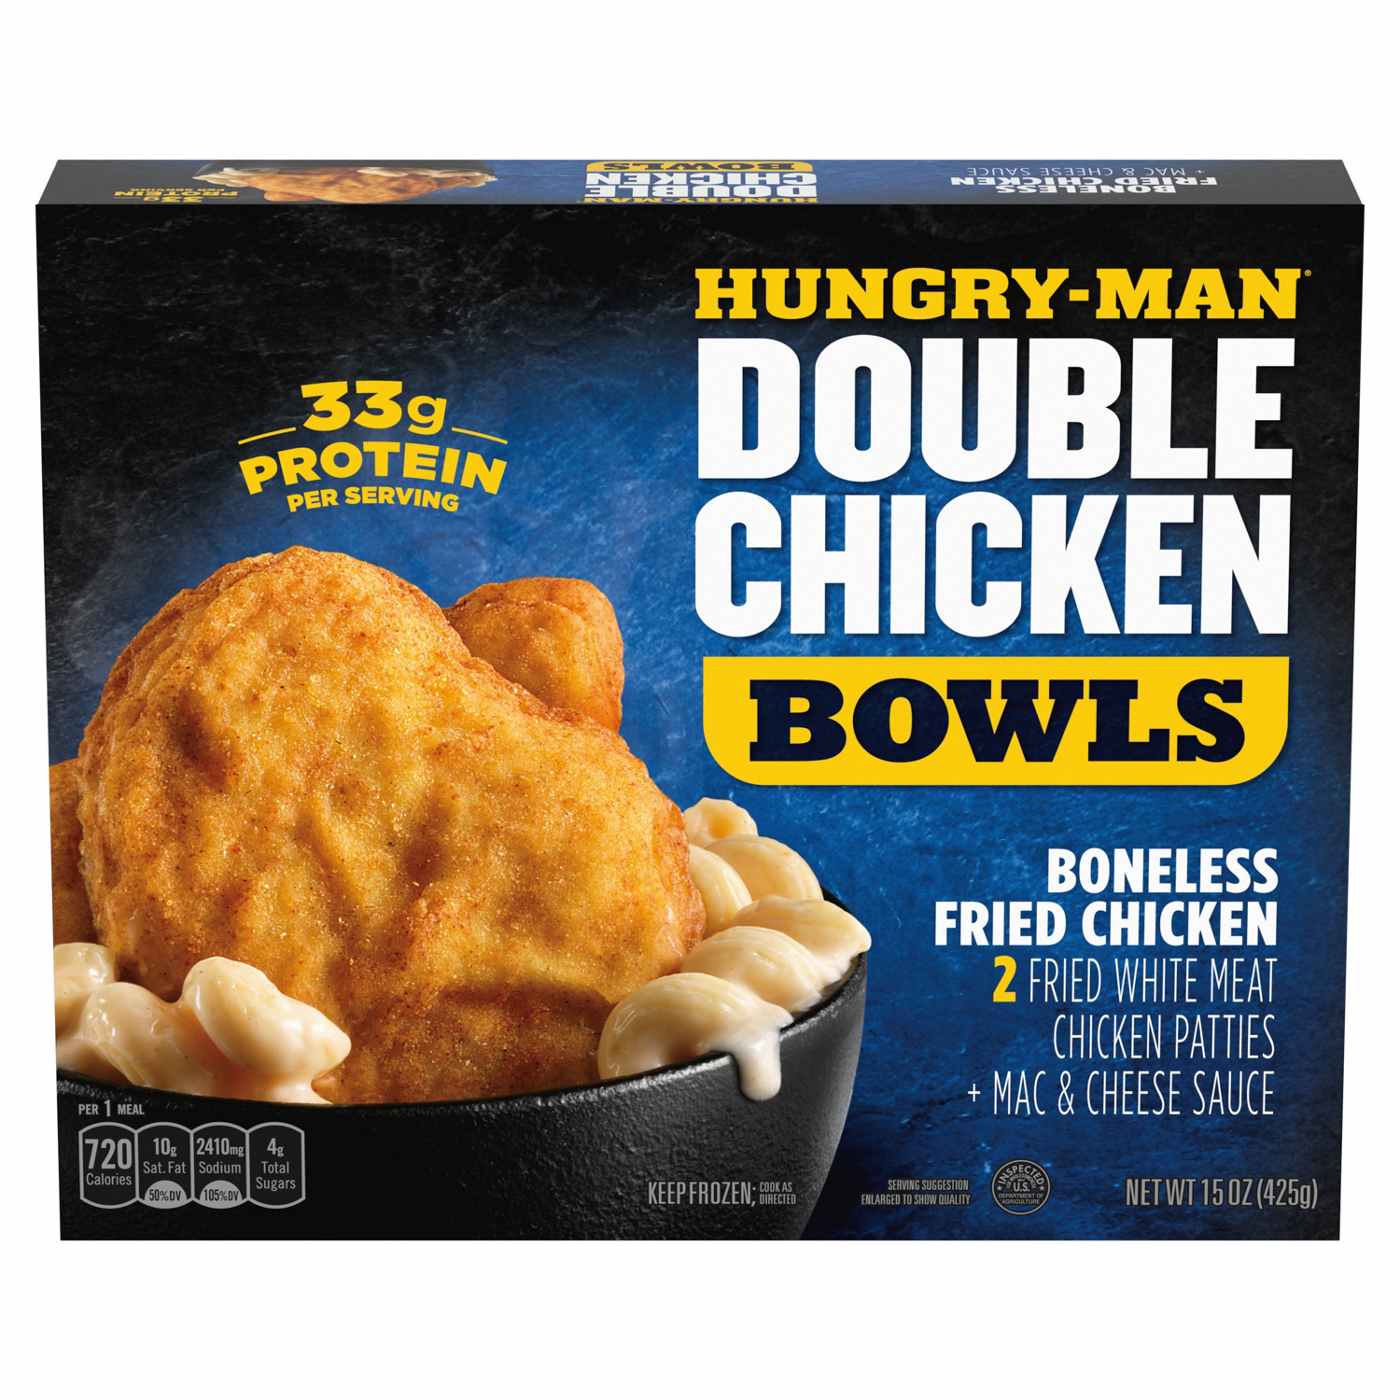 Hungry-Man Double Chicken Bowls Boneless Fried Chicken Patties Frozen Meal; image 1 of 7